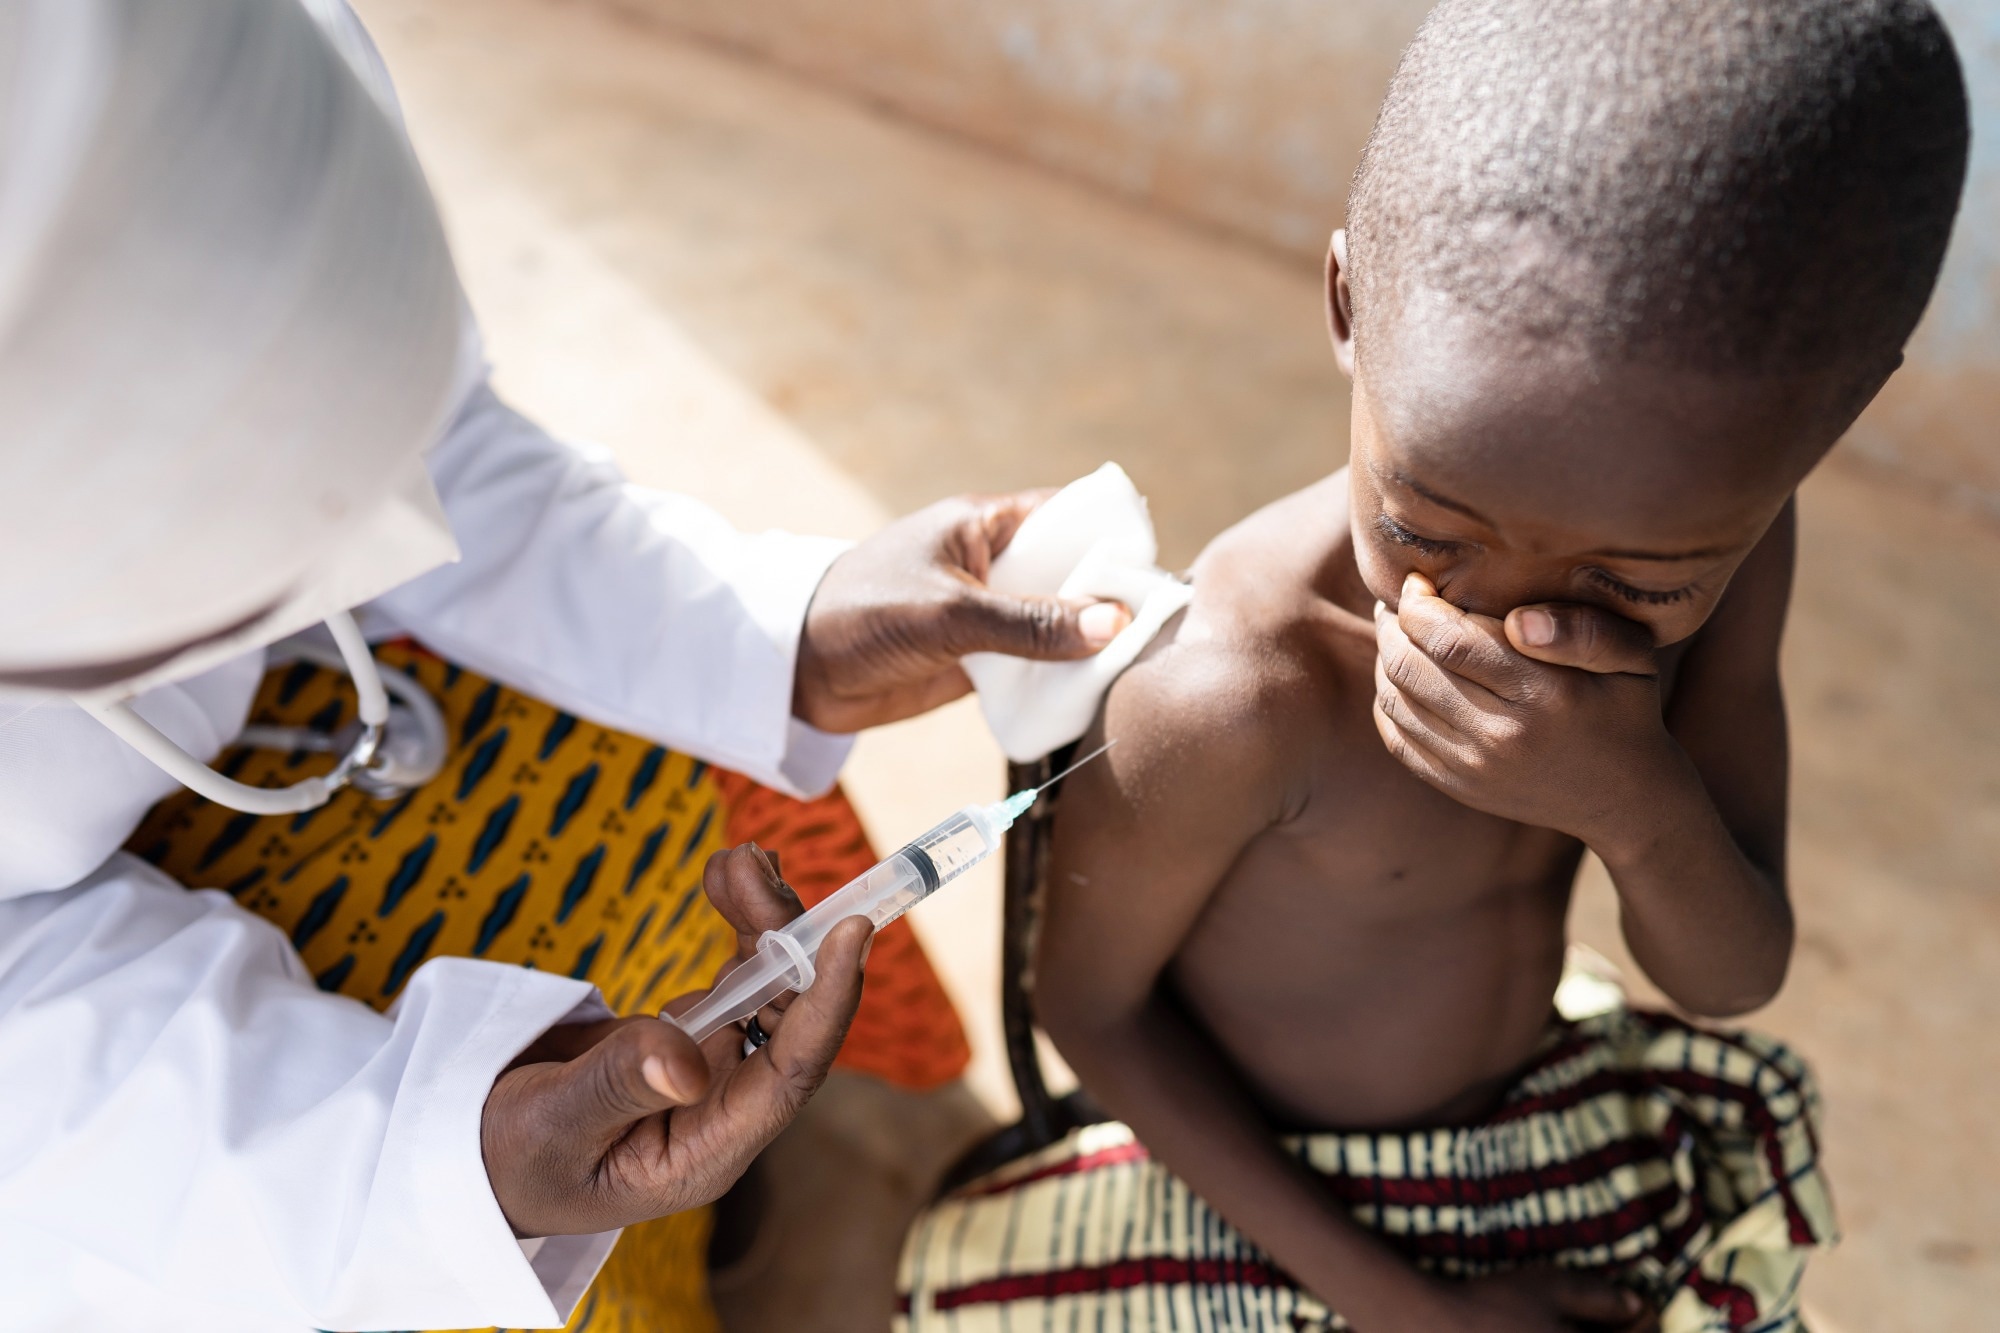 Study: Contribution of vaccination to improved survival and health: modelling 50 years of the Expanded Programme on Immunization. Image Credit: Riccardo Mayer / Shutterstock